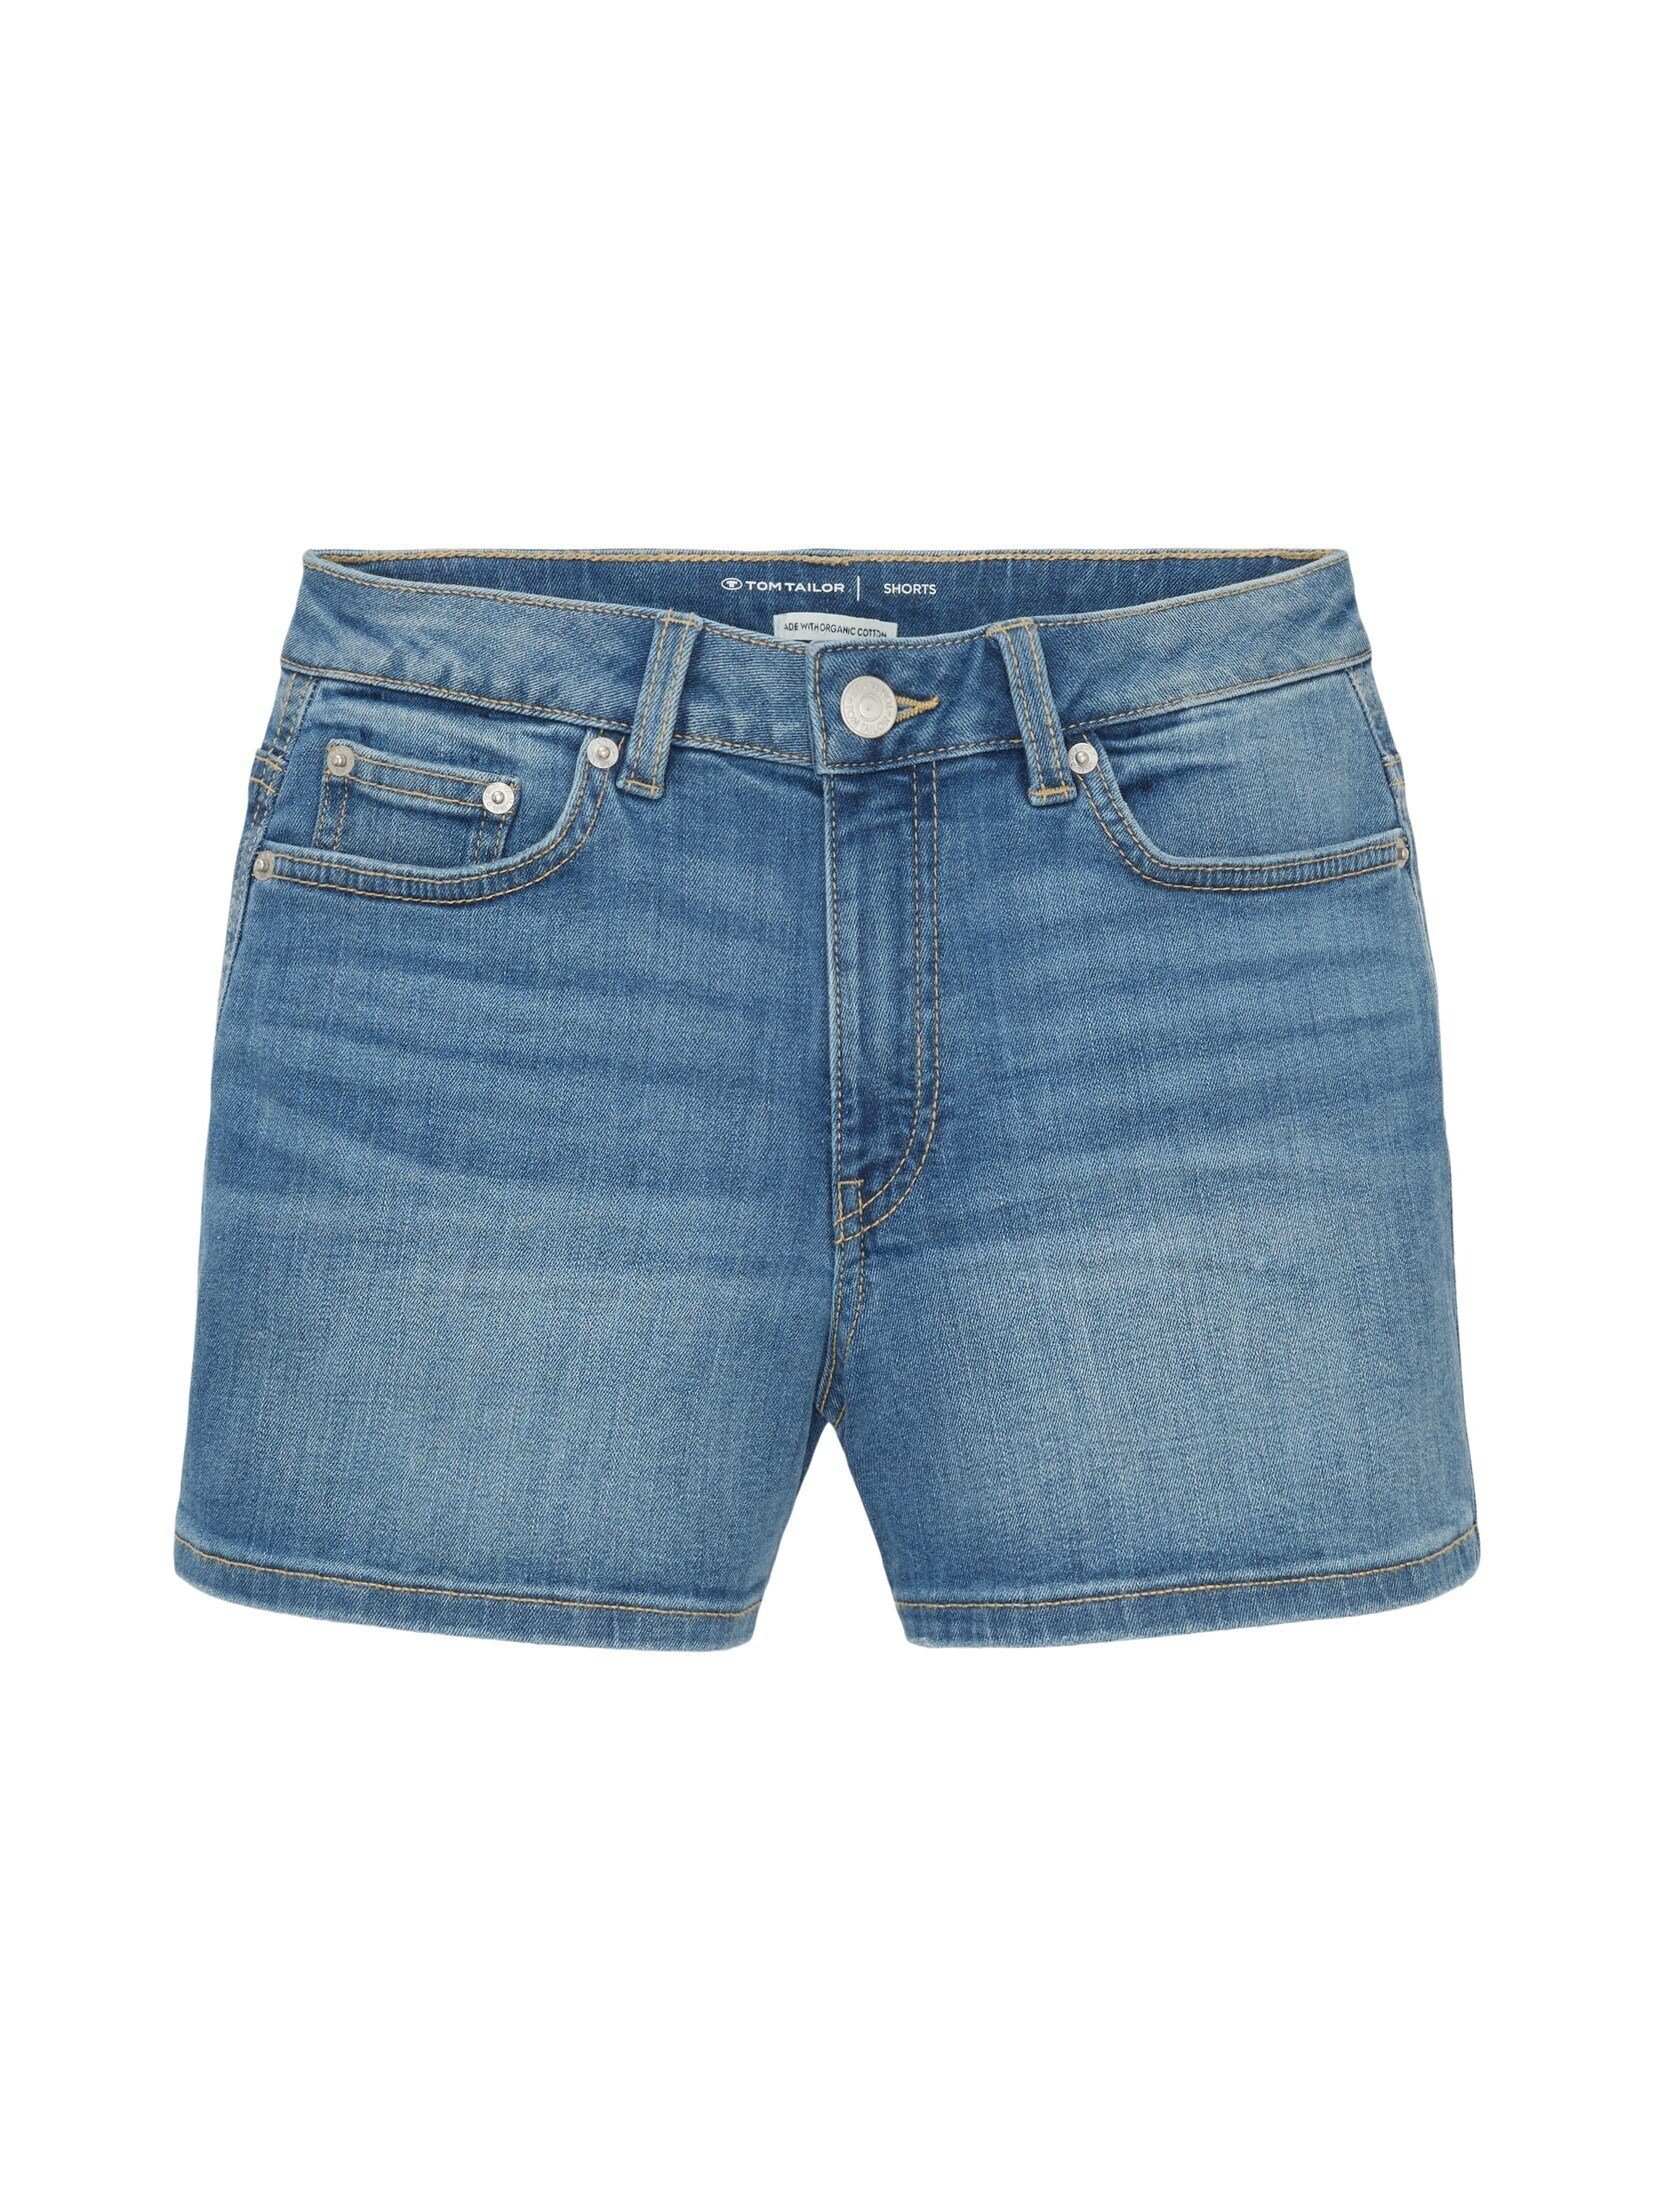 Jeansshorts mit Jeansshorts leichter Stone Waschung Mid TAILOR Used TOM Denim Blue